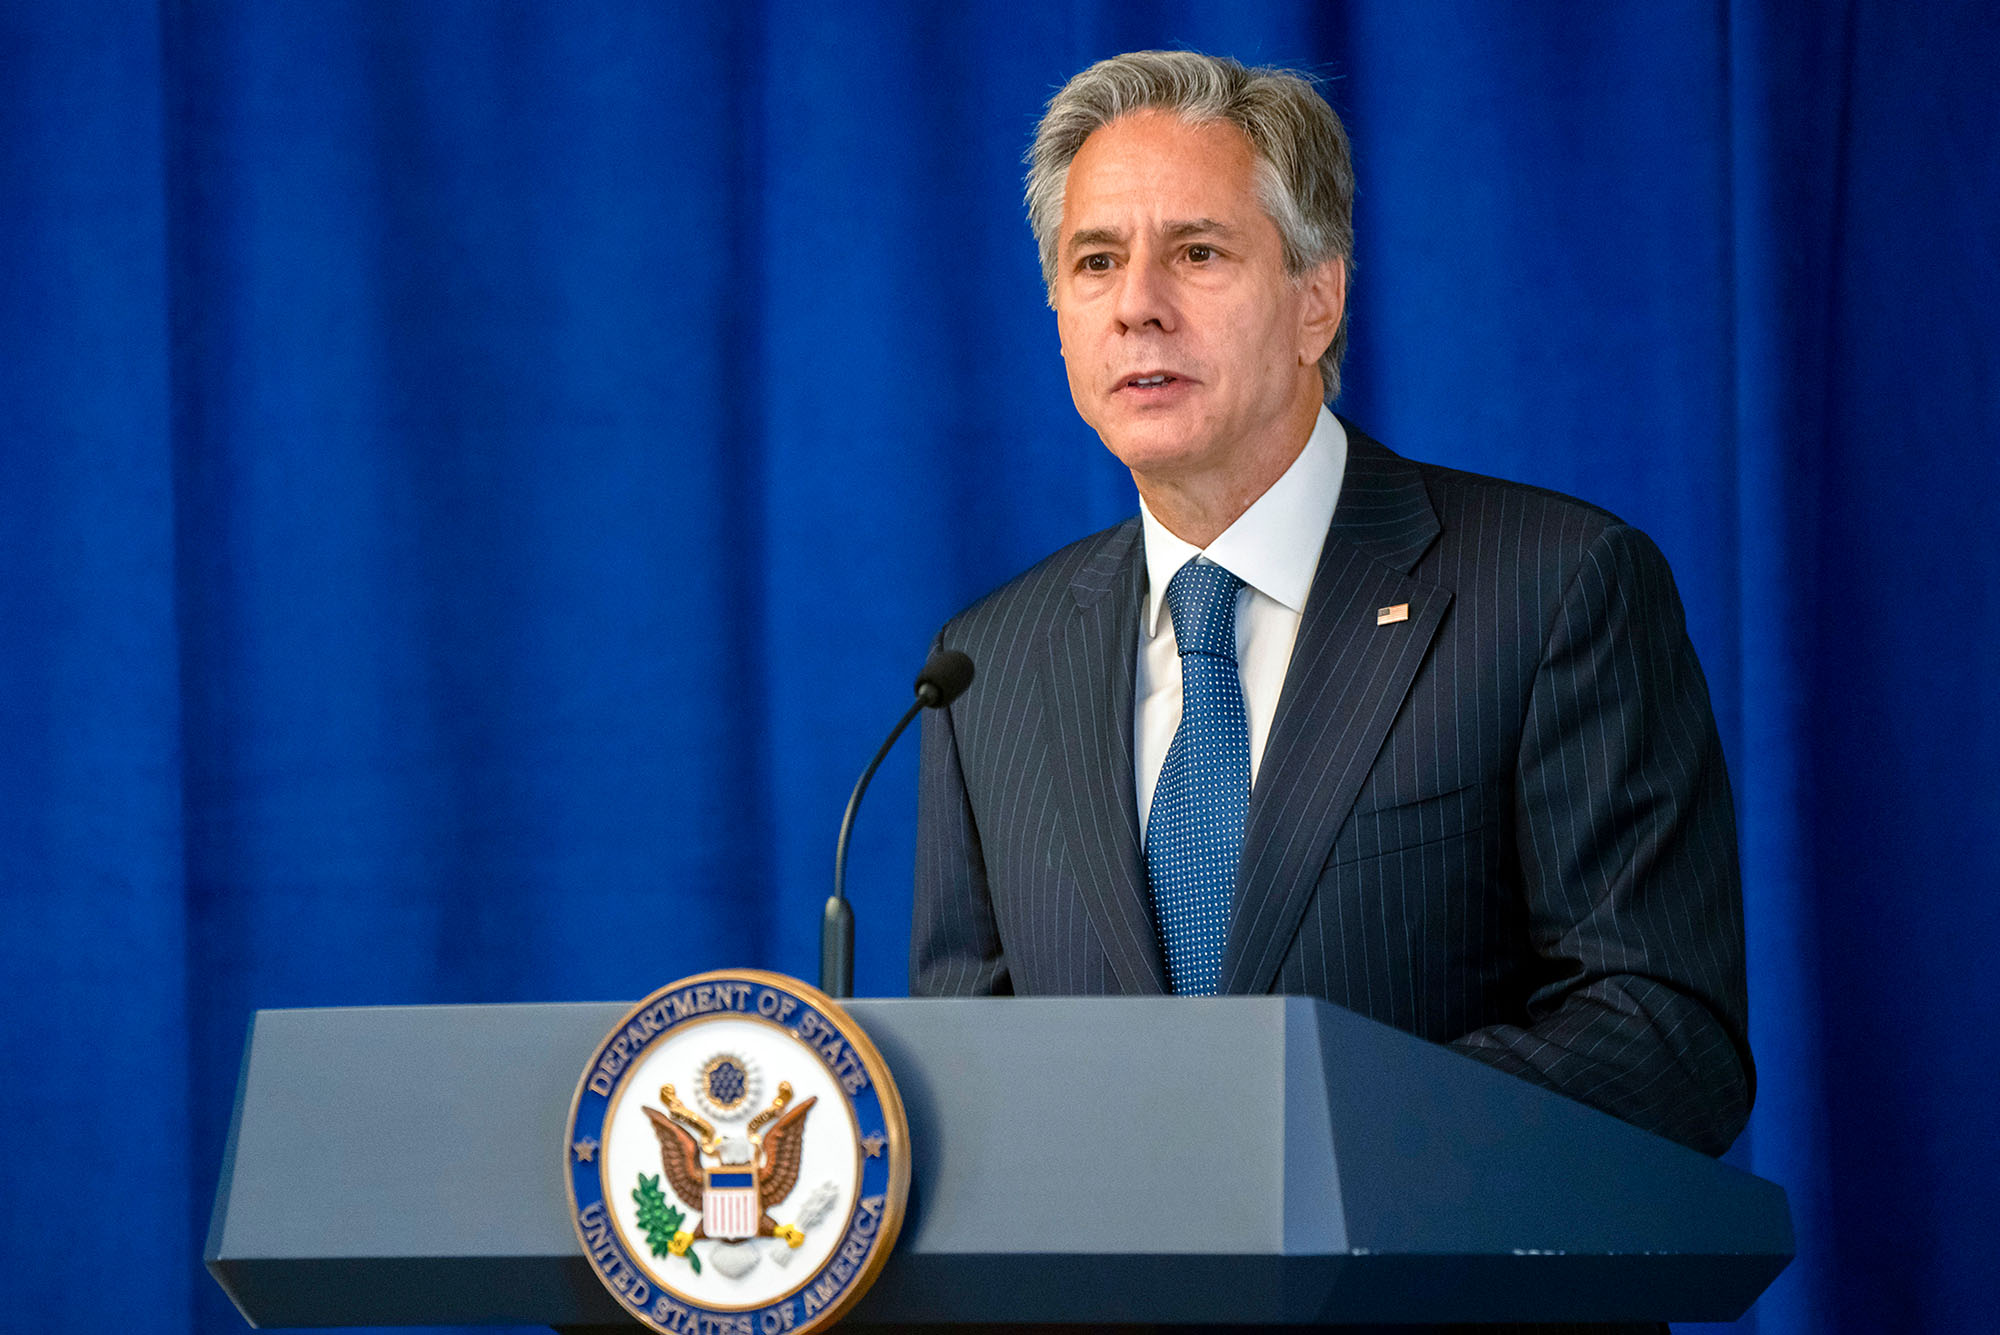 Photo of Secretary of State Antony Blinken speaking about the launch initiative to support Afghan women during the 77th session of the United Nations General Assembly in New York, Sept. 20, 2022. An older white man with graying hair stands in front of a blue curtain at a lectern with the US Government insignia on it. He wears a dark gray suit and blue tie.